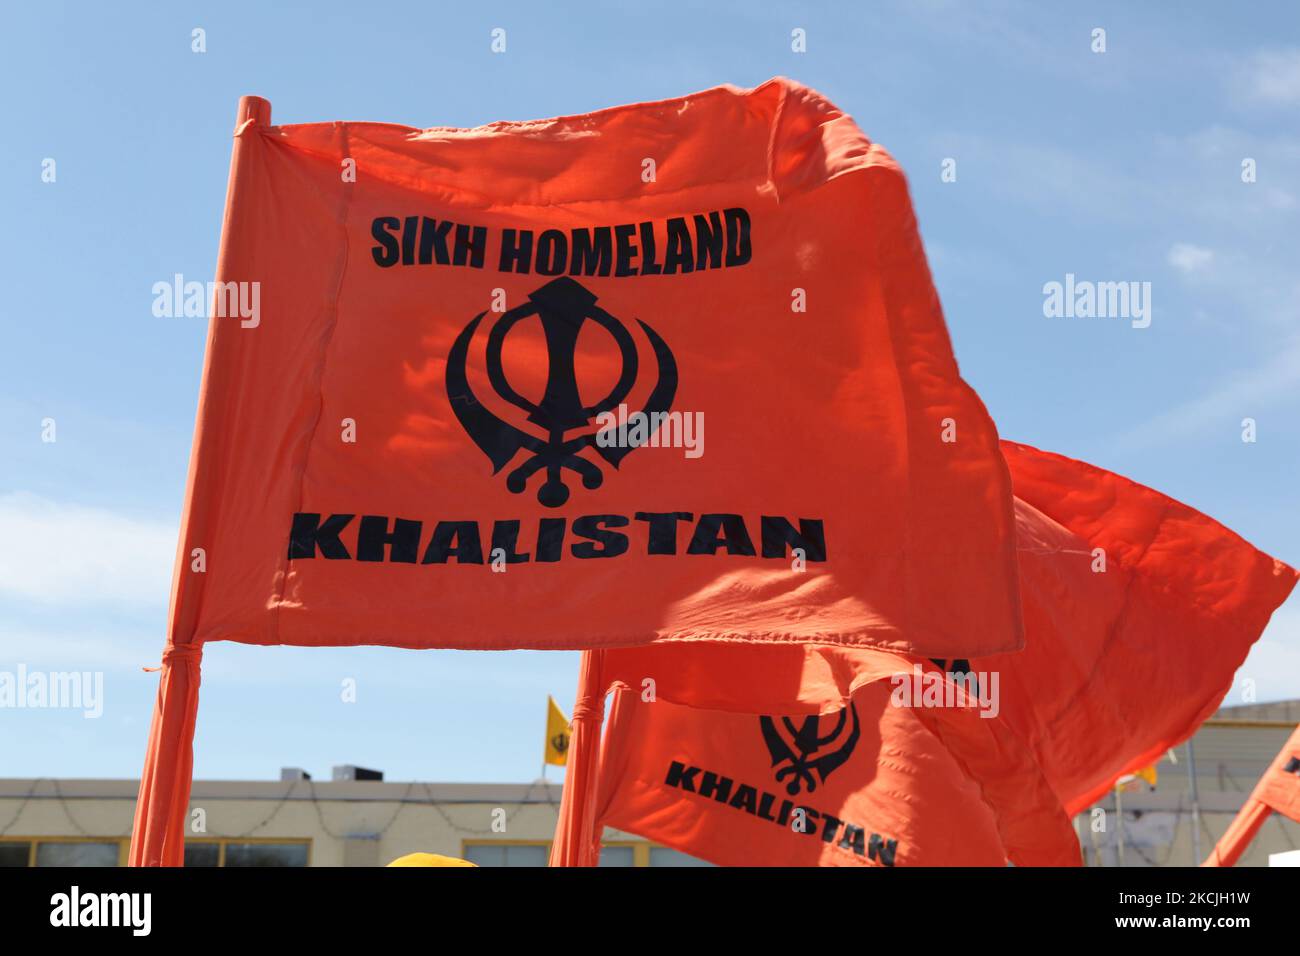 Khalistan flag seen as Canadian Pro-Khalistan Sikhs protest against the Indian government and call for a separate Sikh state called Khalistan in Malton, Ontario, Canada, on May 06, 2012. Thousands of Sikhs attended a Nagar Kirtan to celebrate Vaisakhi and to show their discontent with the Indian government. The Khalistan movement refers to a movement which seeks to create a separate Sikh state, called Khalistan in the Punjab region of India. The territorial definition of the proposed nation is disputed, with some believing it should be carved simply out of the Indian state of Punjab, where Sik Stock Photo